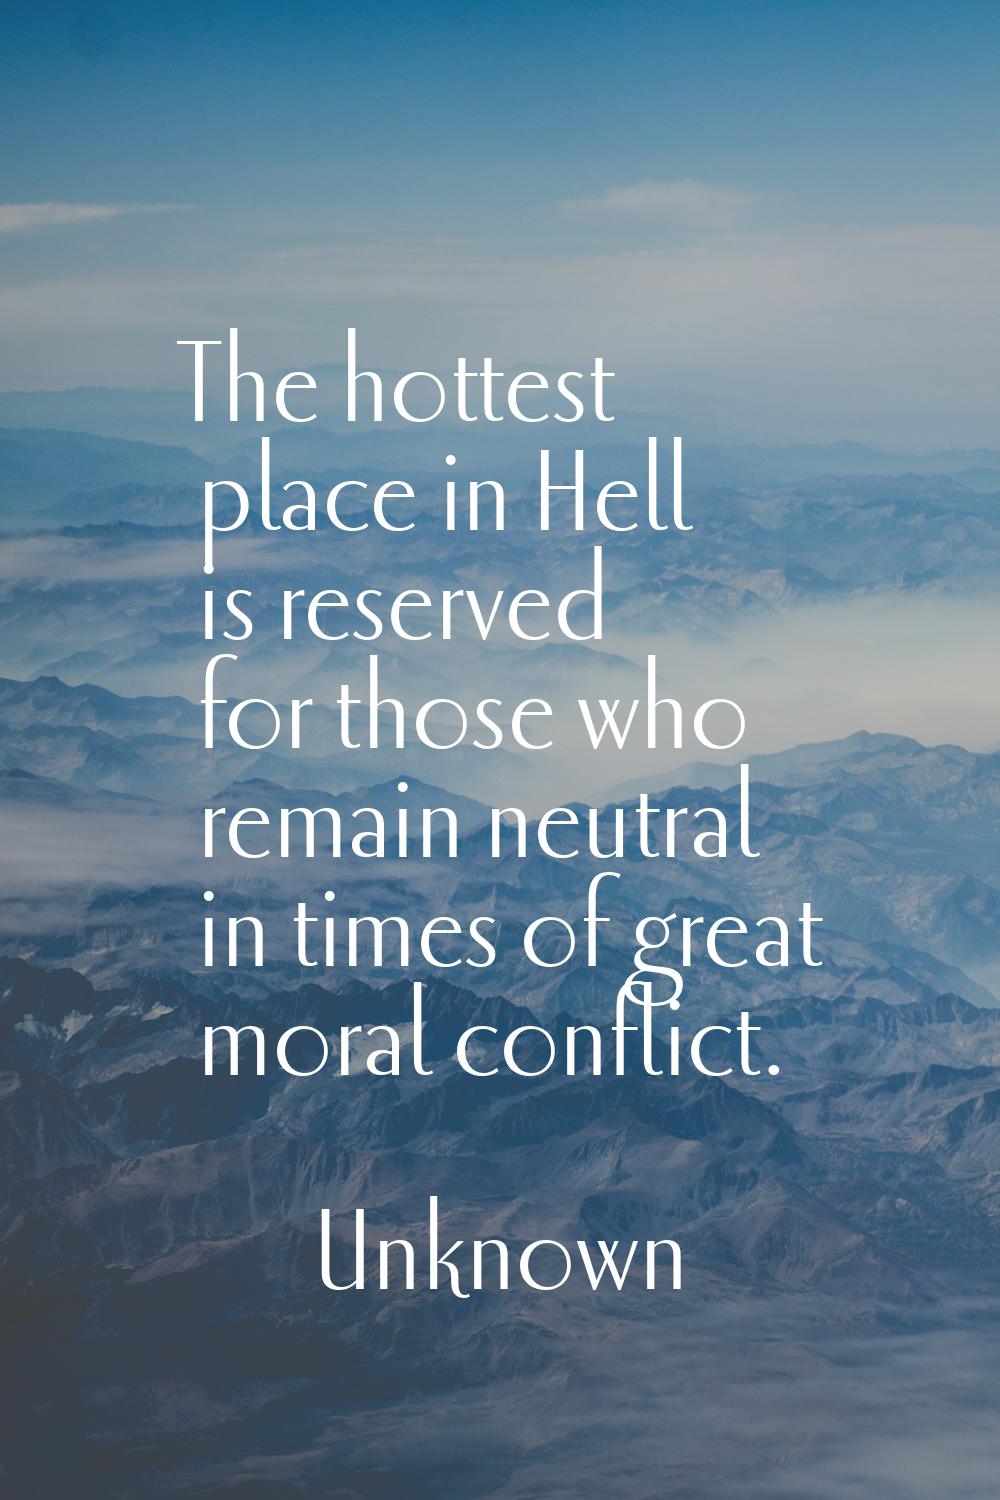 The hottest place in Hell is reserved for those who remain neutral in times of great moral conflict